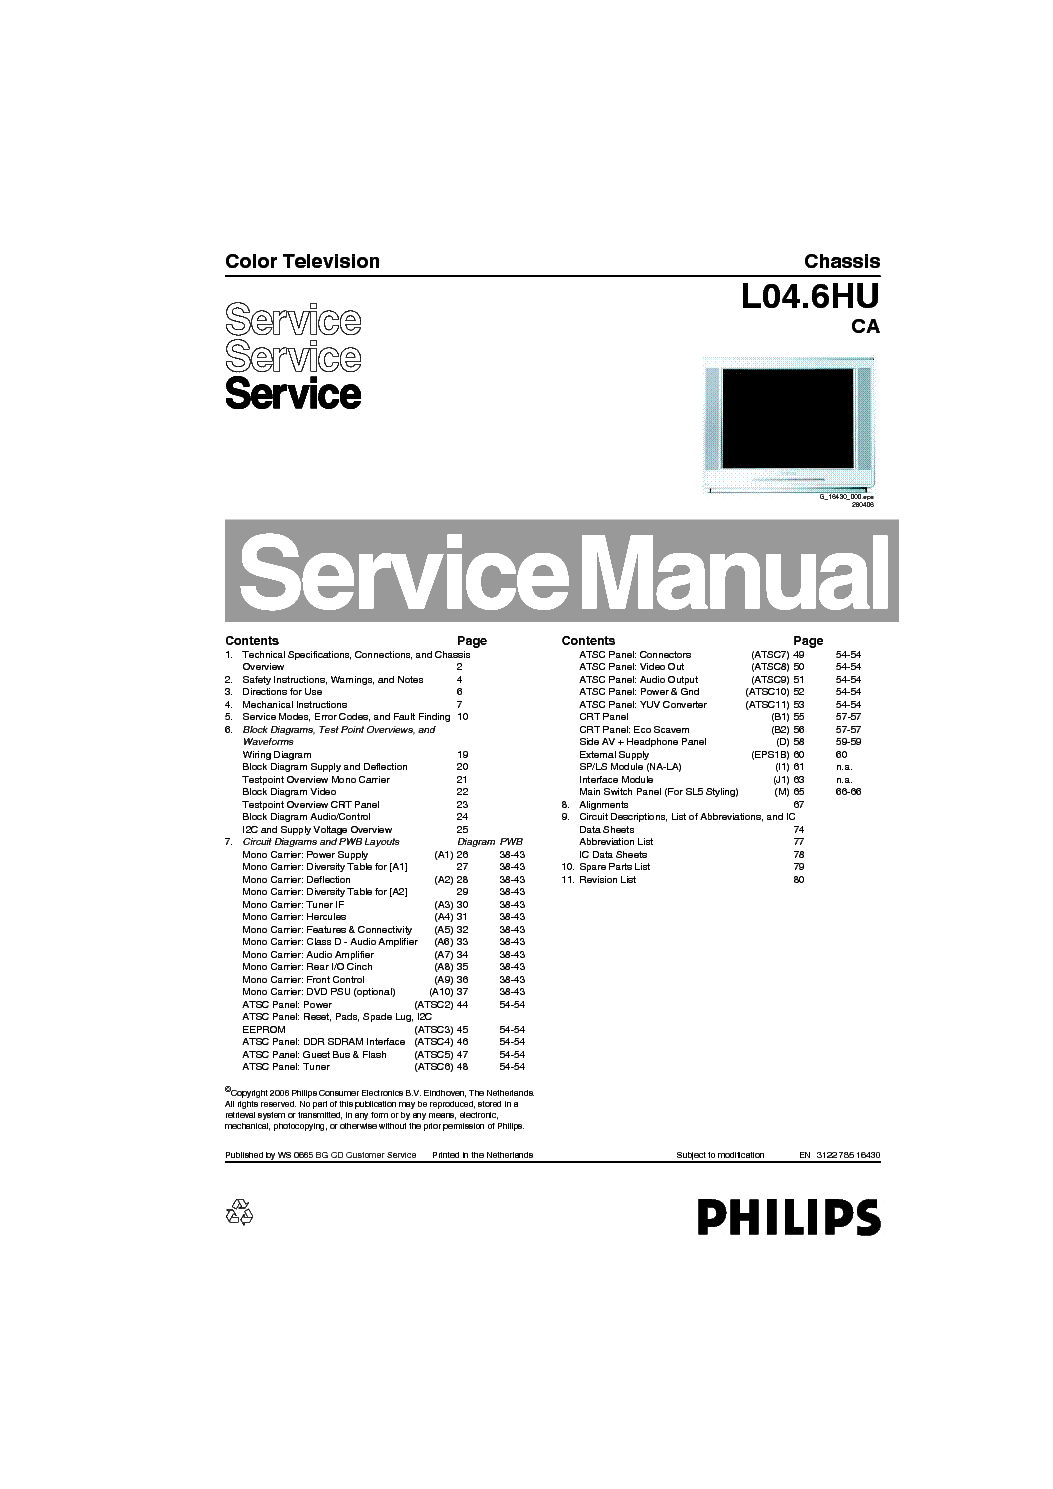 PHILIPS L04 6HU CA CHASSIS service manual (1st page)